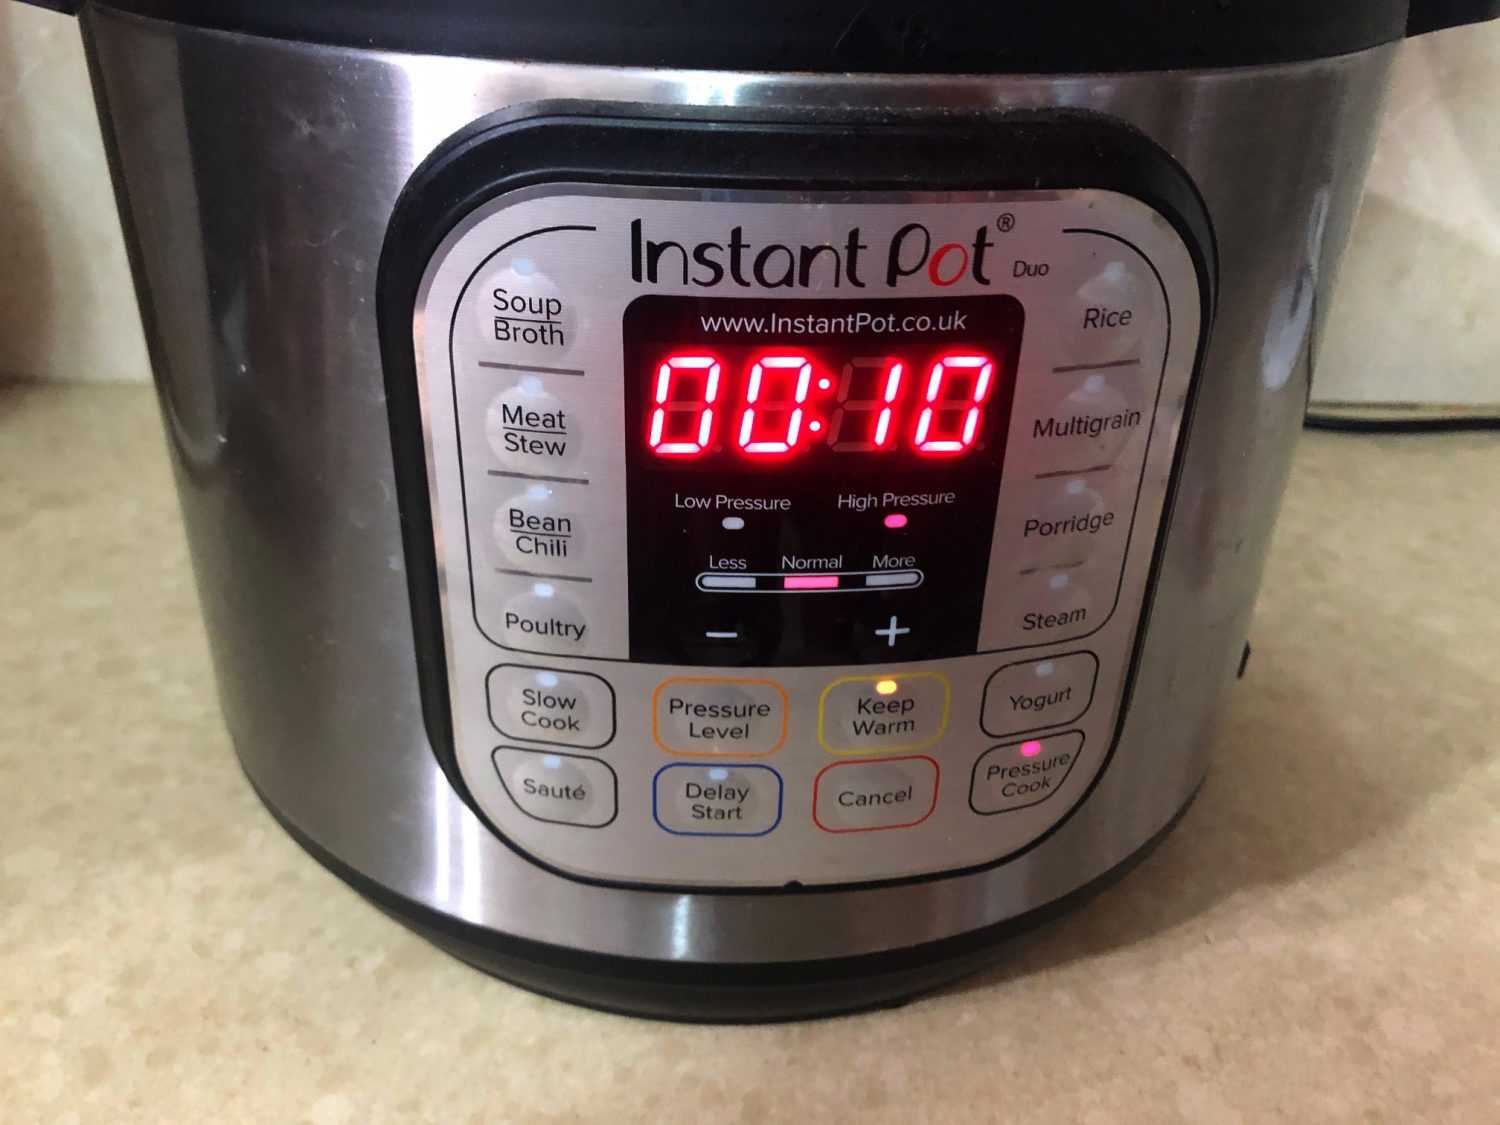 Update on Instant Pot as a Slow Cooker - DadCooksDinner